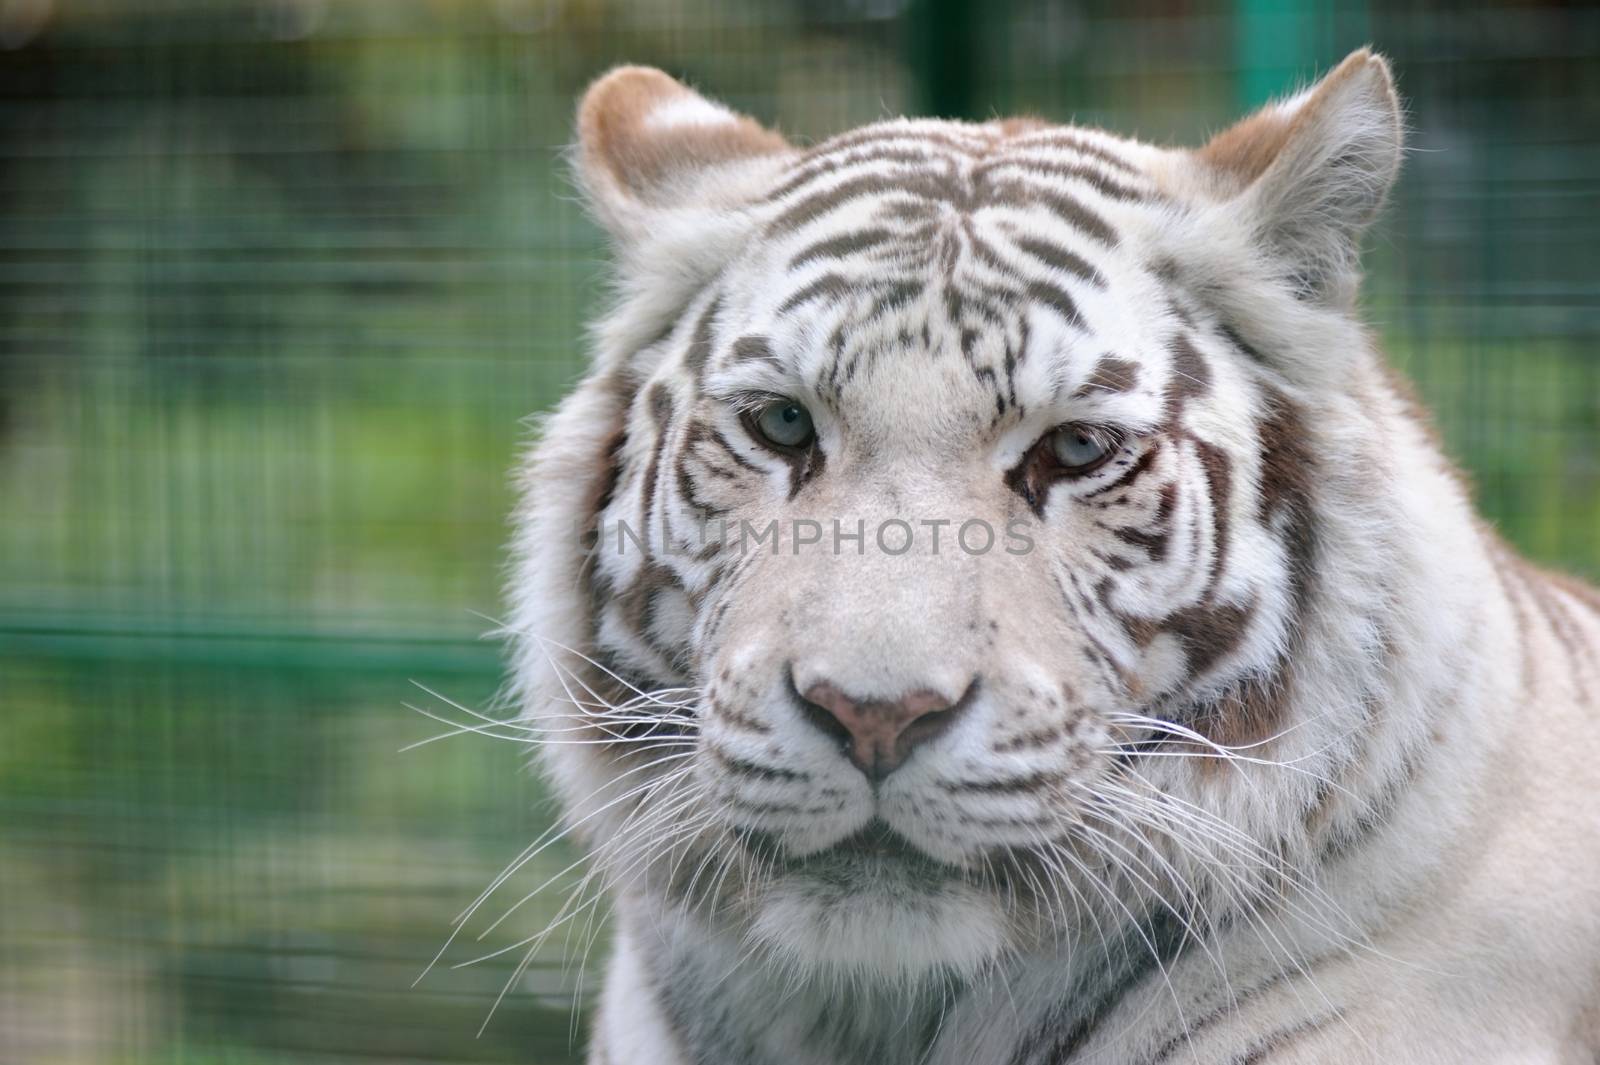 White tiger close-up with ears back